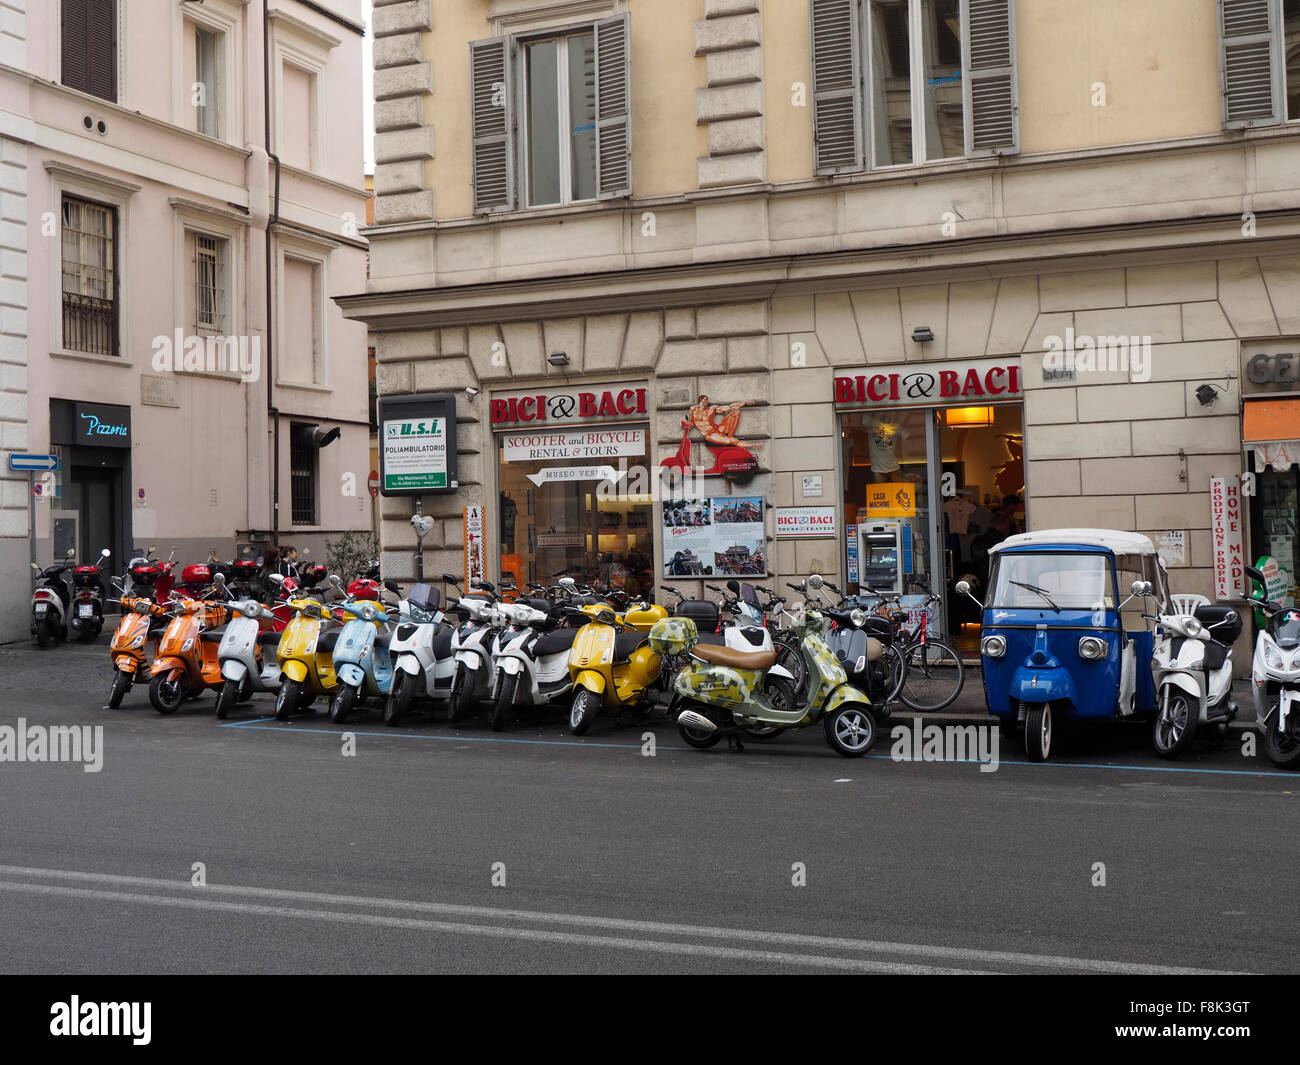 Bici & Baci scooter rental company in the city center of Rome, Italy Stock Photo